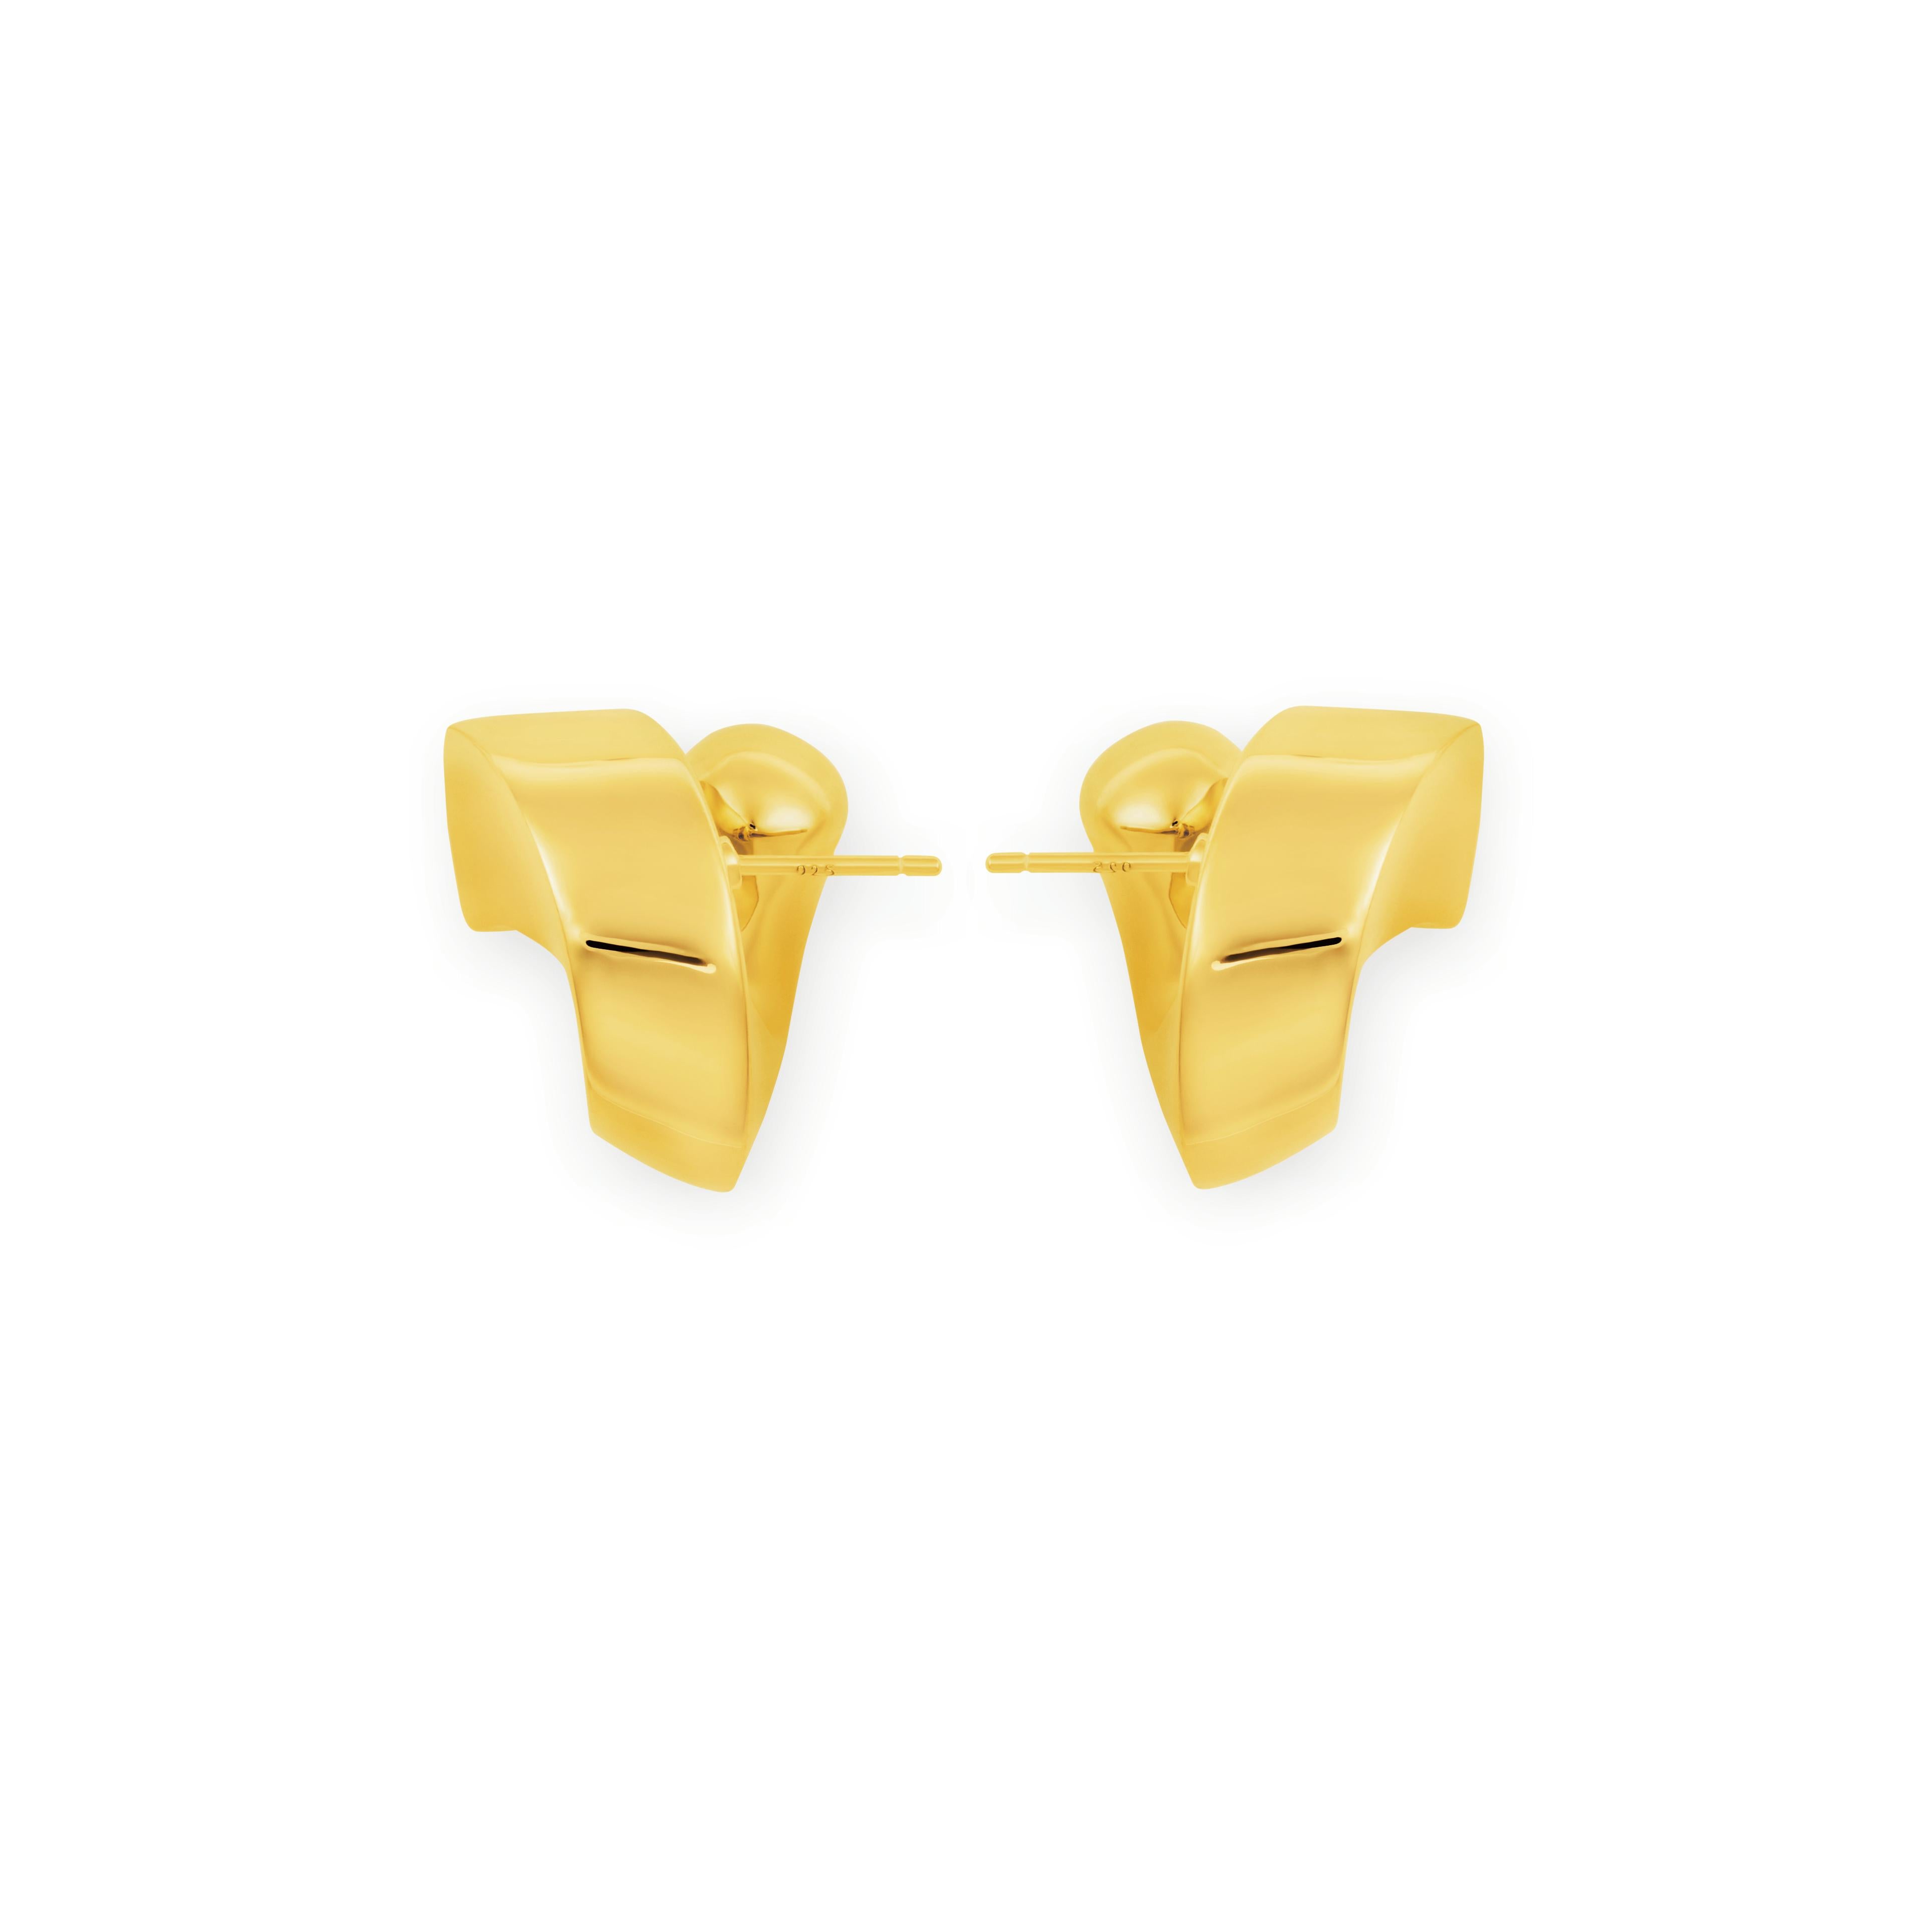 Mistova's Atmosphere earrings combine the sculptural with the wearable. Made from the finest 18K gold. Highly polished for a luxury appearance. The earrings are chunky but hollowed out to maintain their comfort.